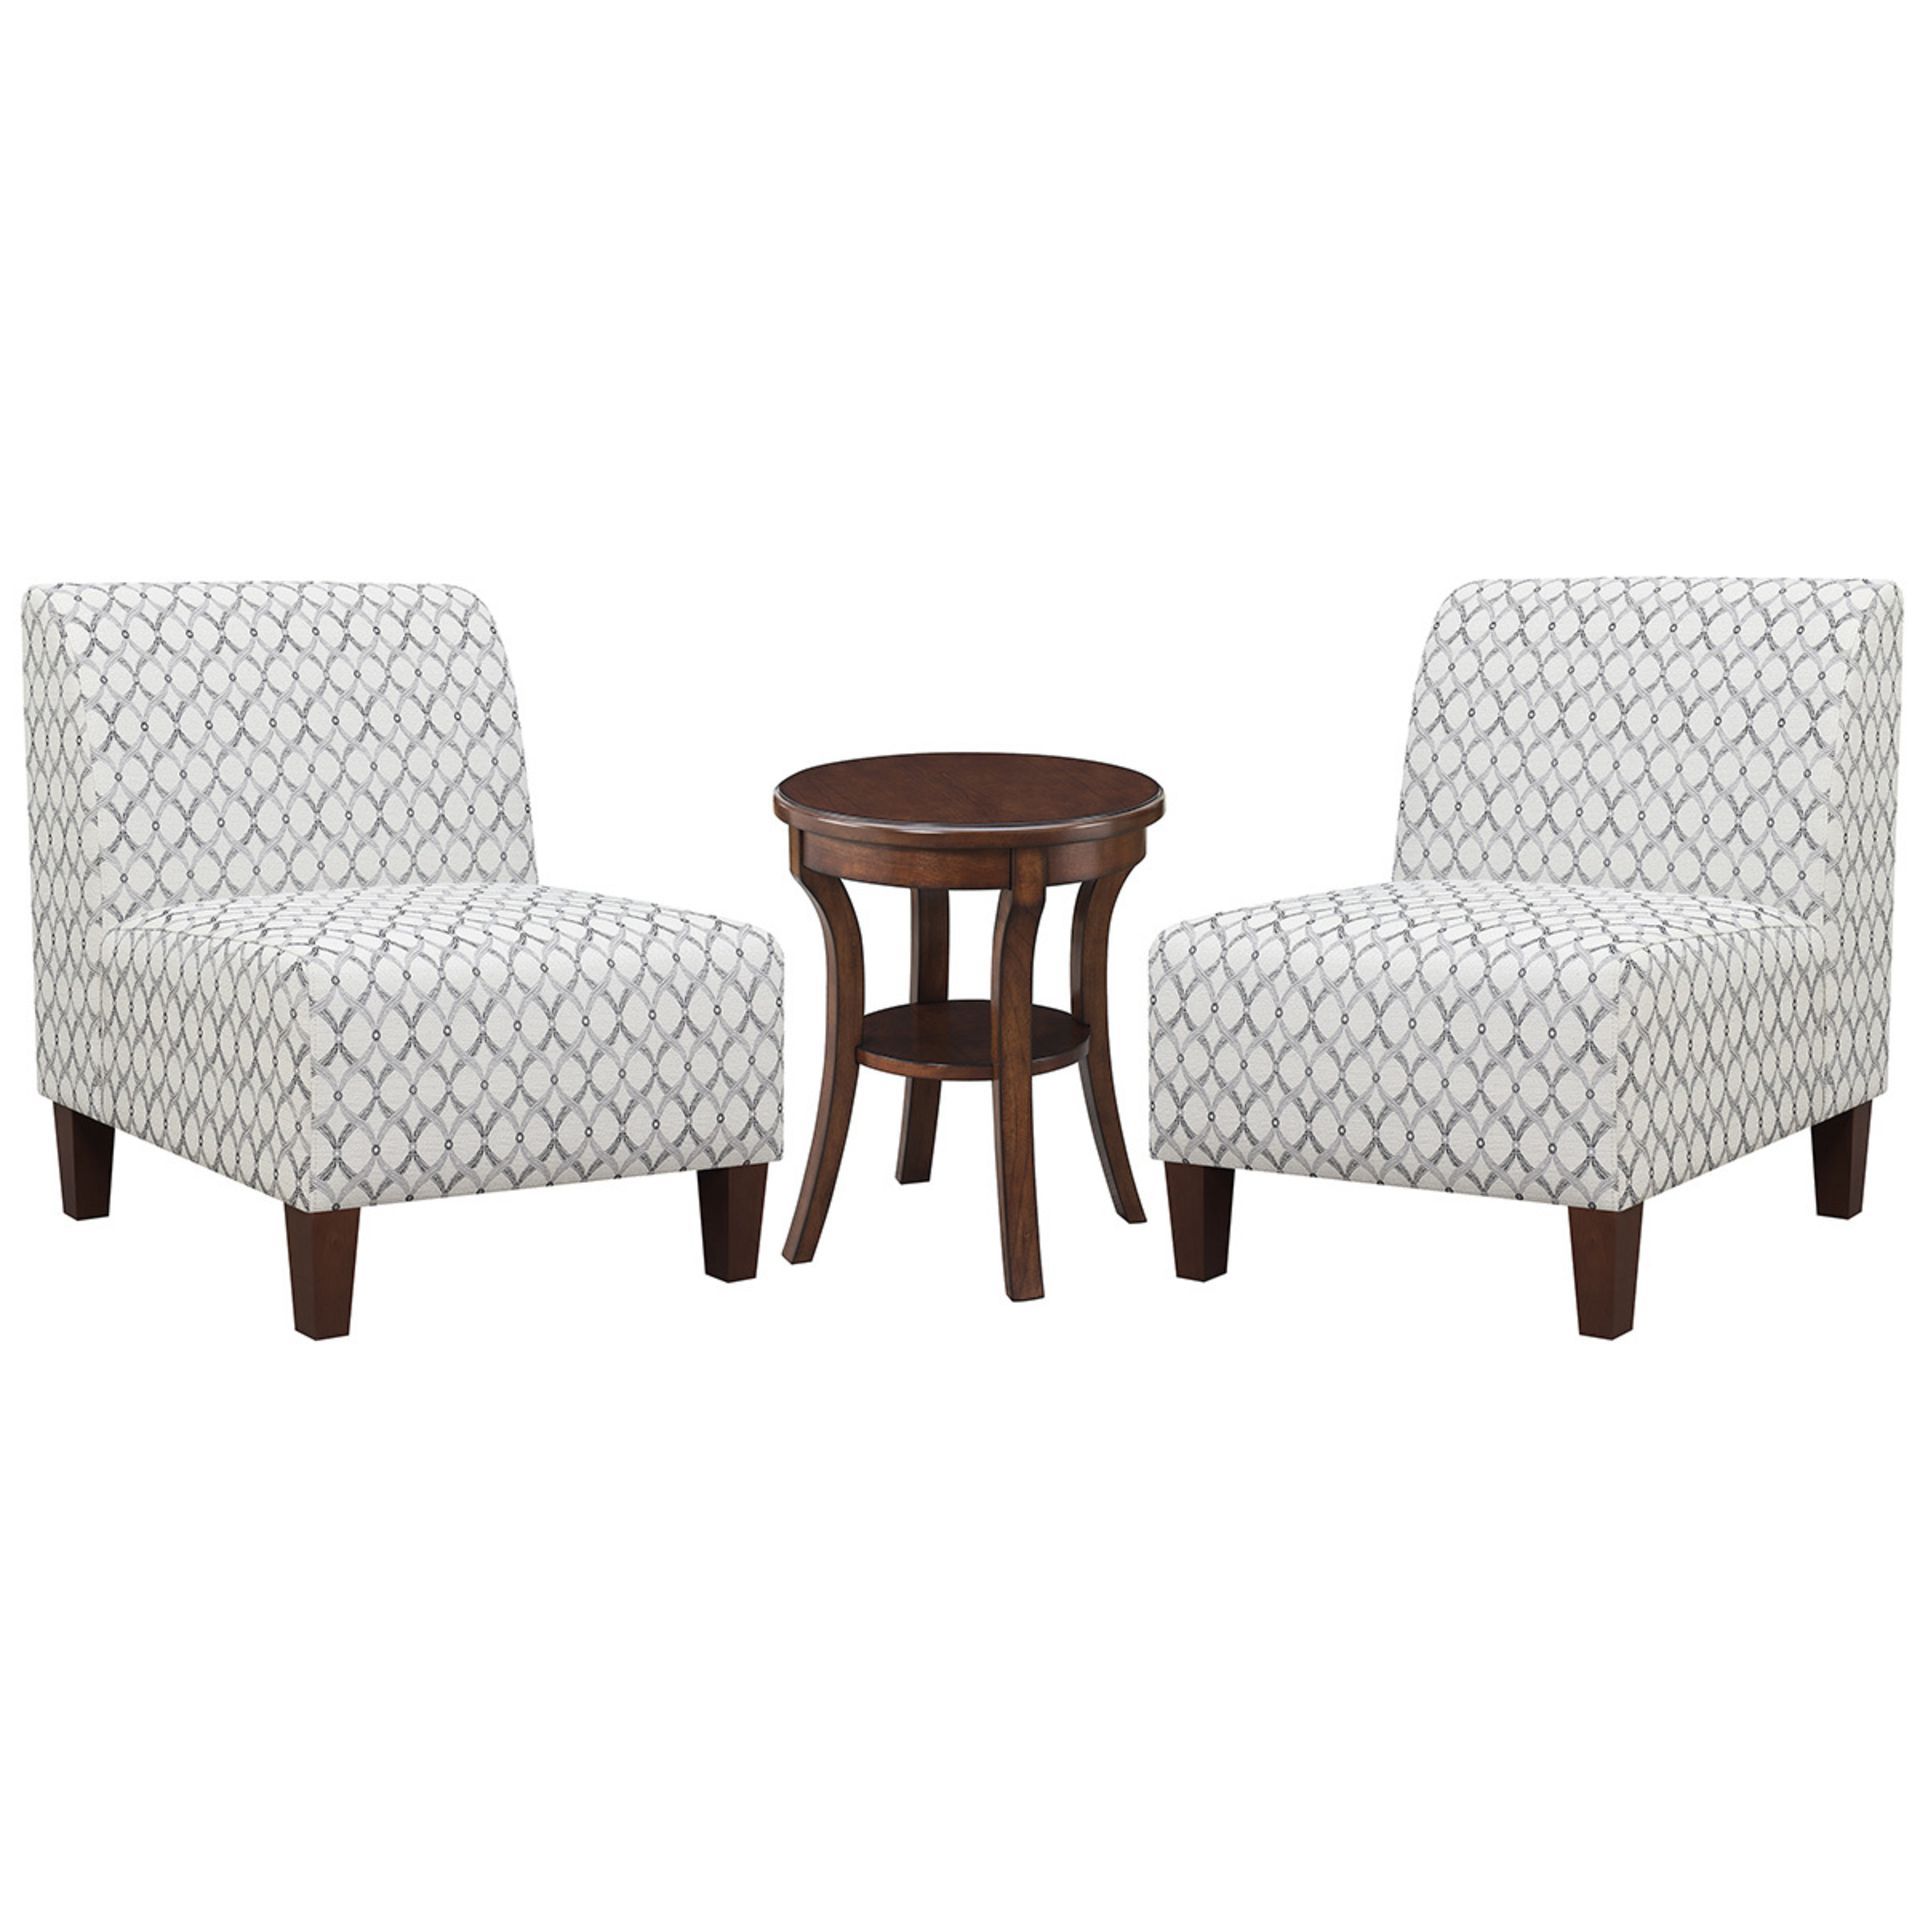 1 AVENUE SIX 3 PIECE FABRIC CHAIR AND ACCENT TABLE SET RRP Â£299 (GENERIC IMAGE GUIDE)